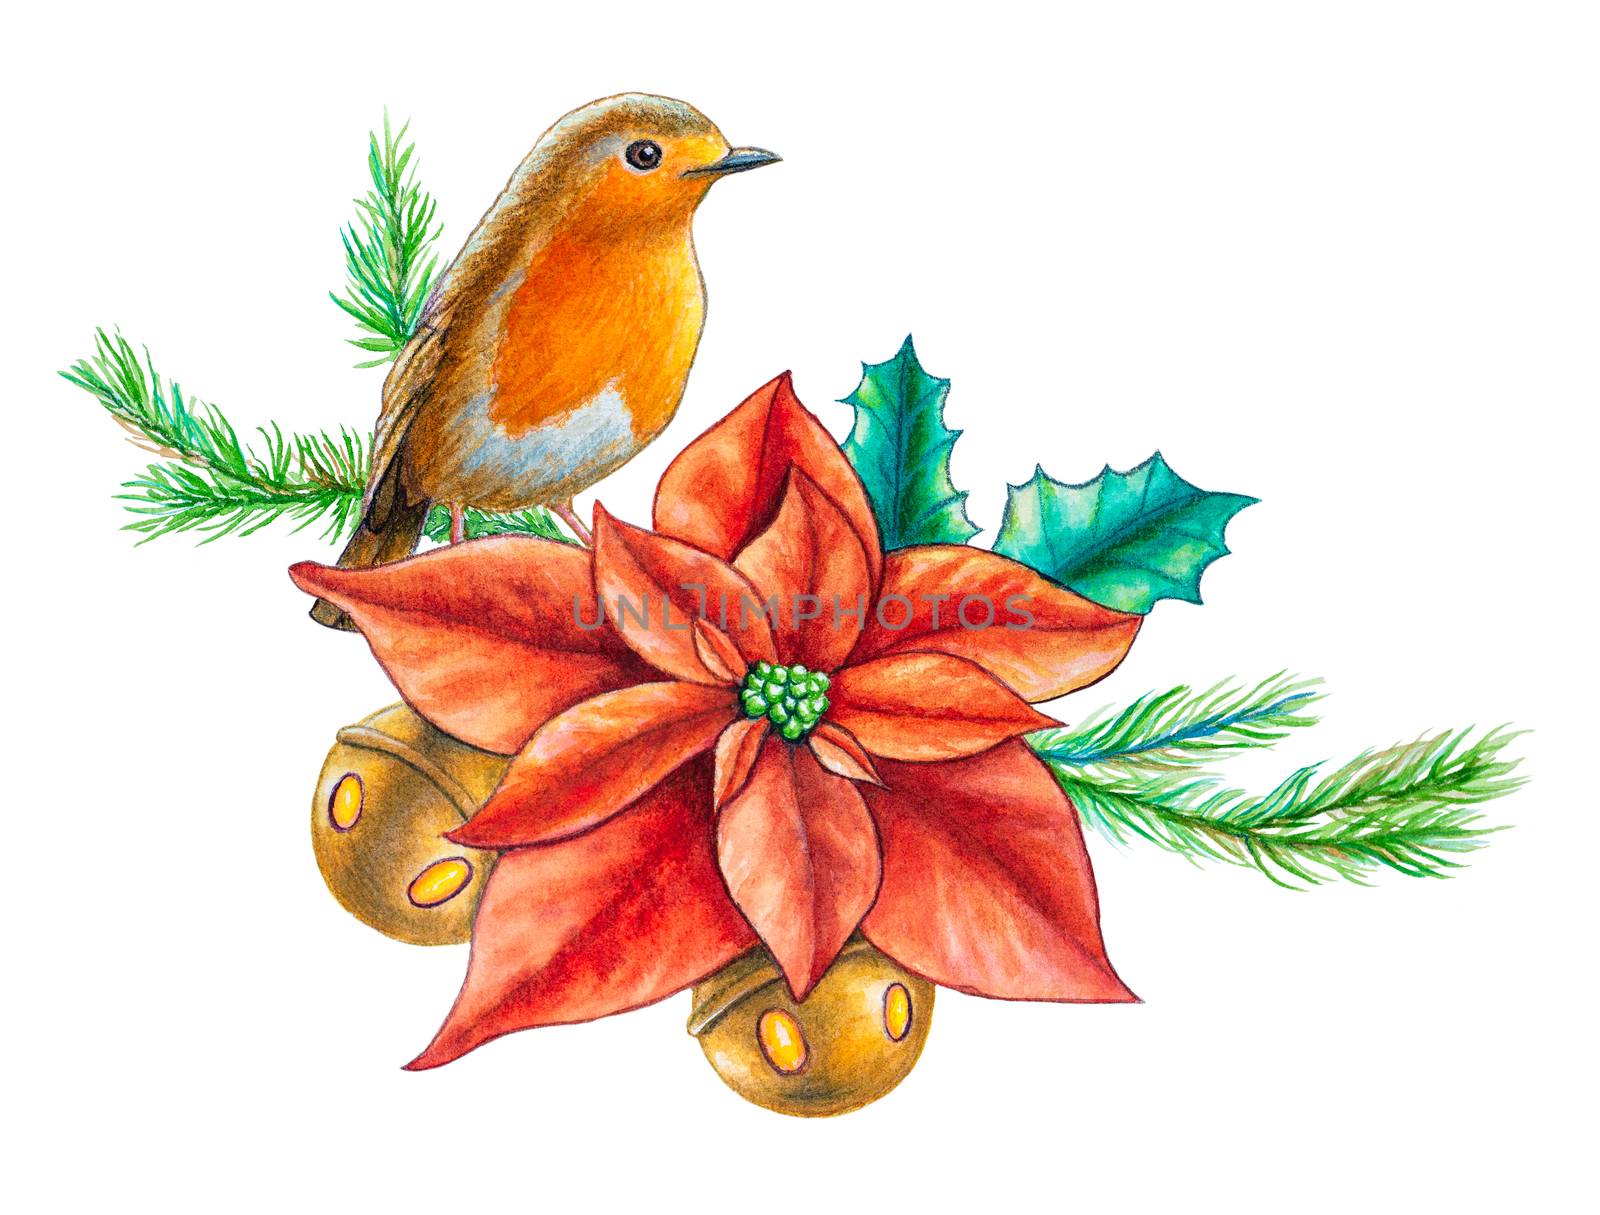 Watercolor Christmas composition by Andreus